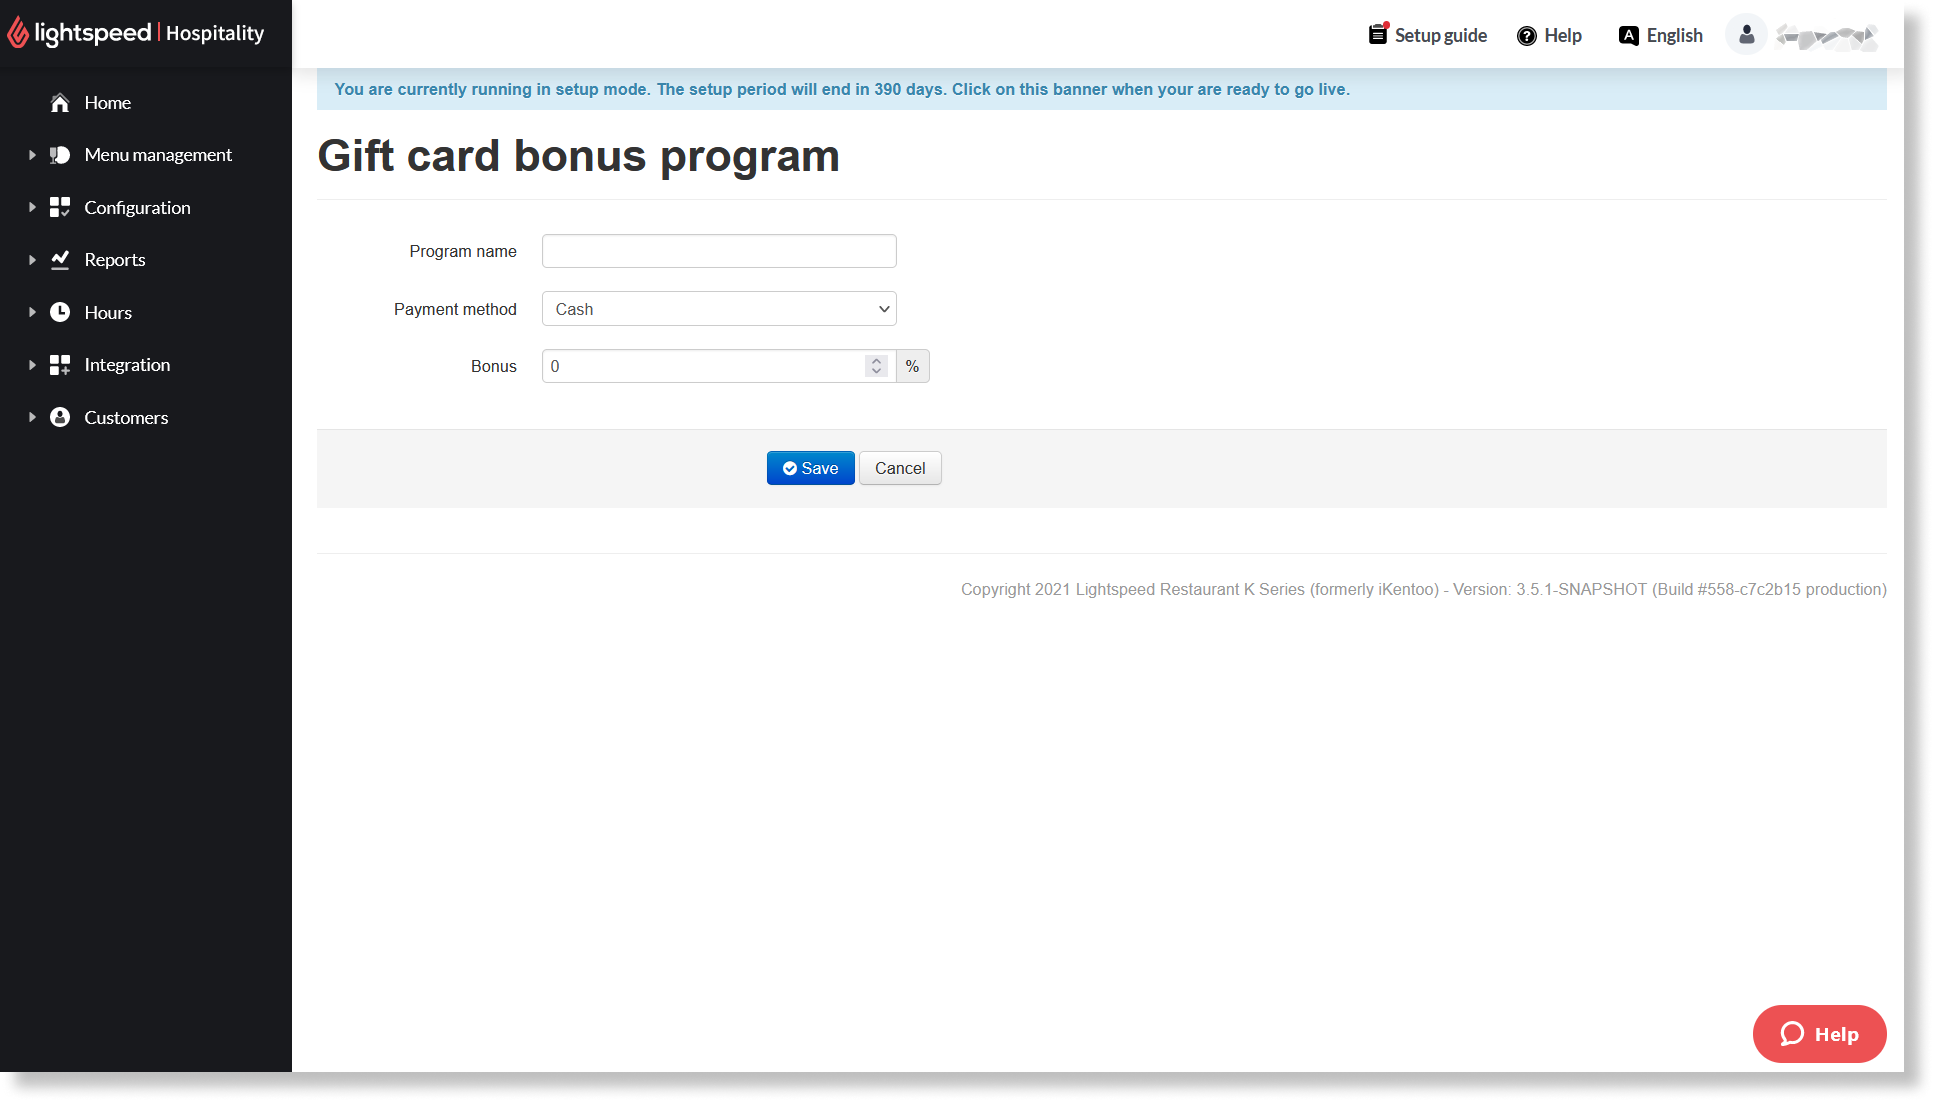 lsk-nv-customers-loyalty_cards-card_batches-gift-create_a_gift_card_bonus_program-form-ds.png